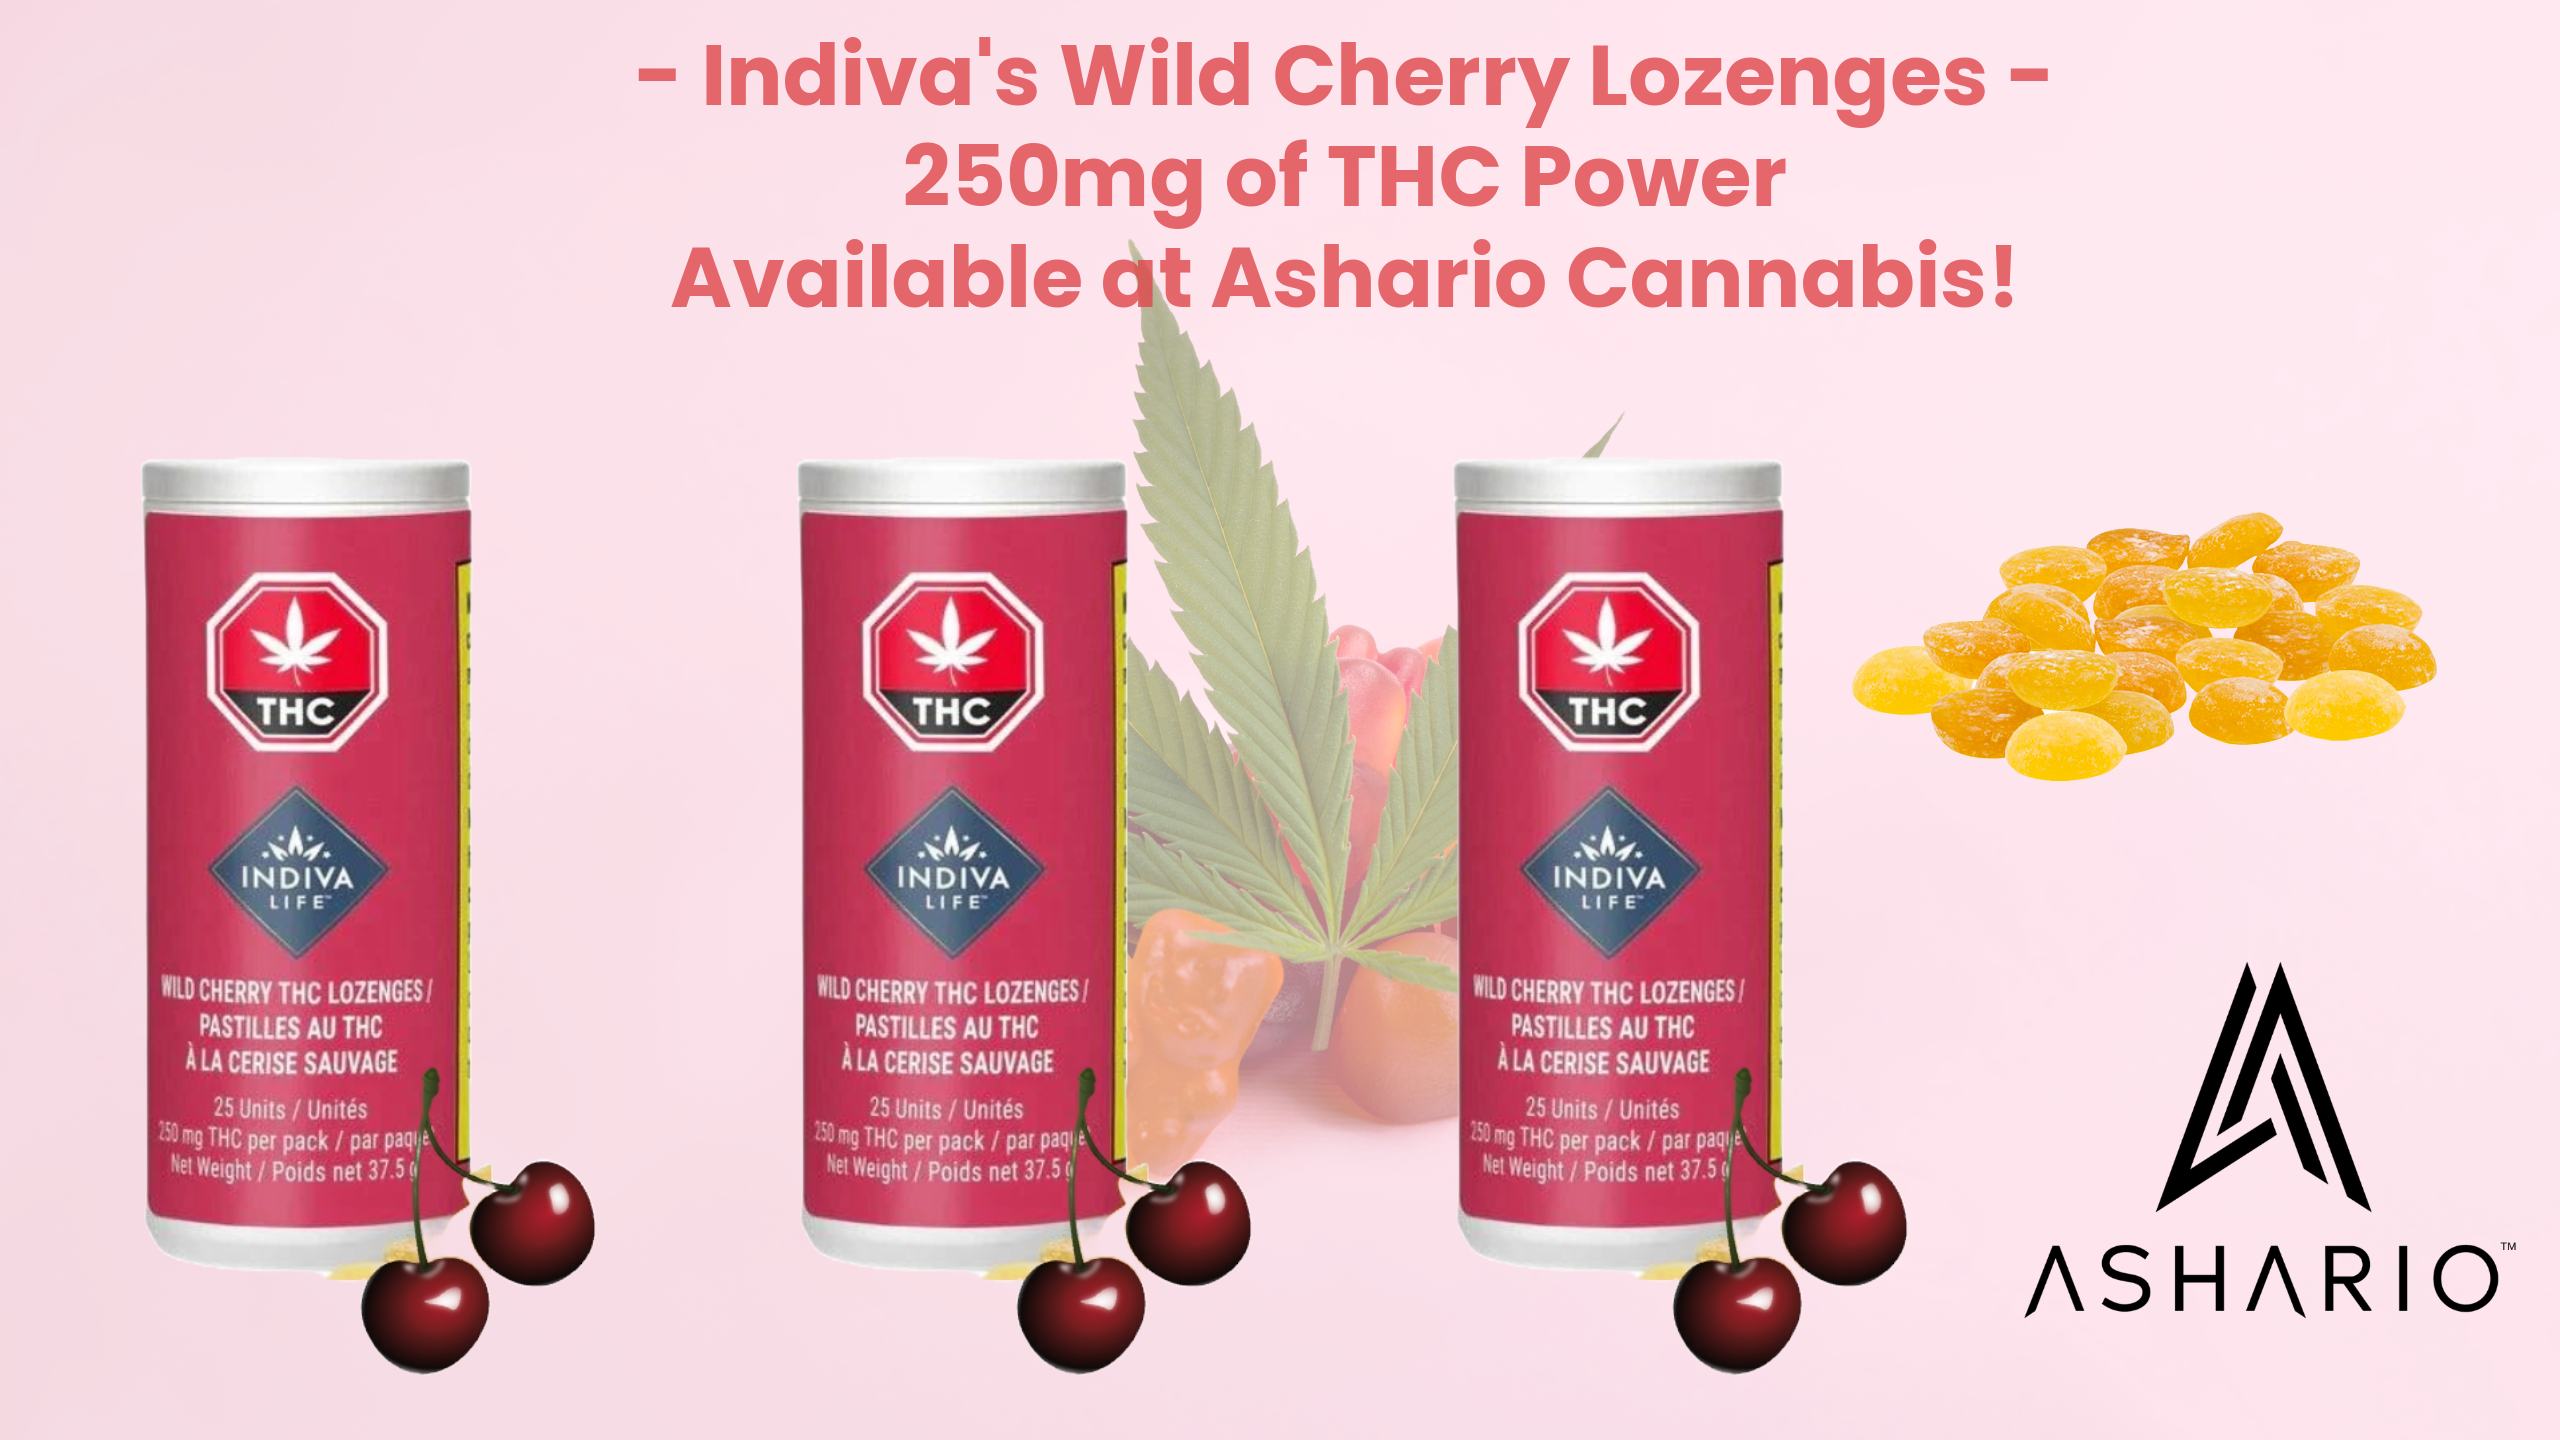 Indulge in the irresistible sweetness of Indiva Life's Wild Cherry Lozenges, each infused with a potent 250mg THC. 